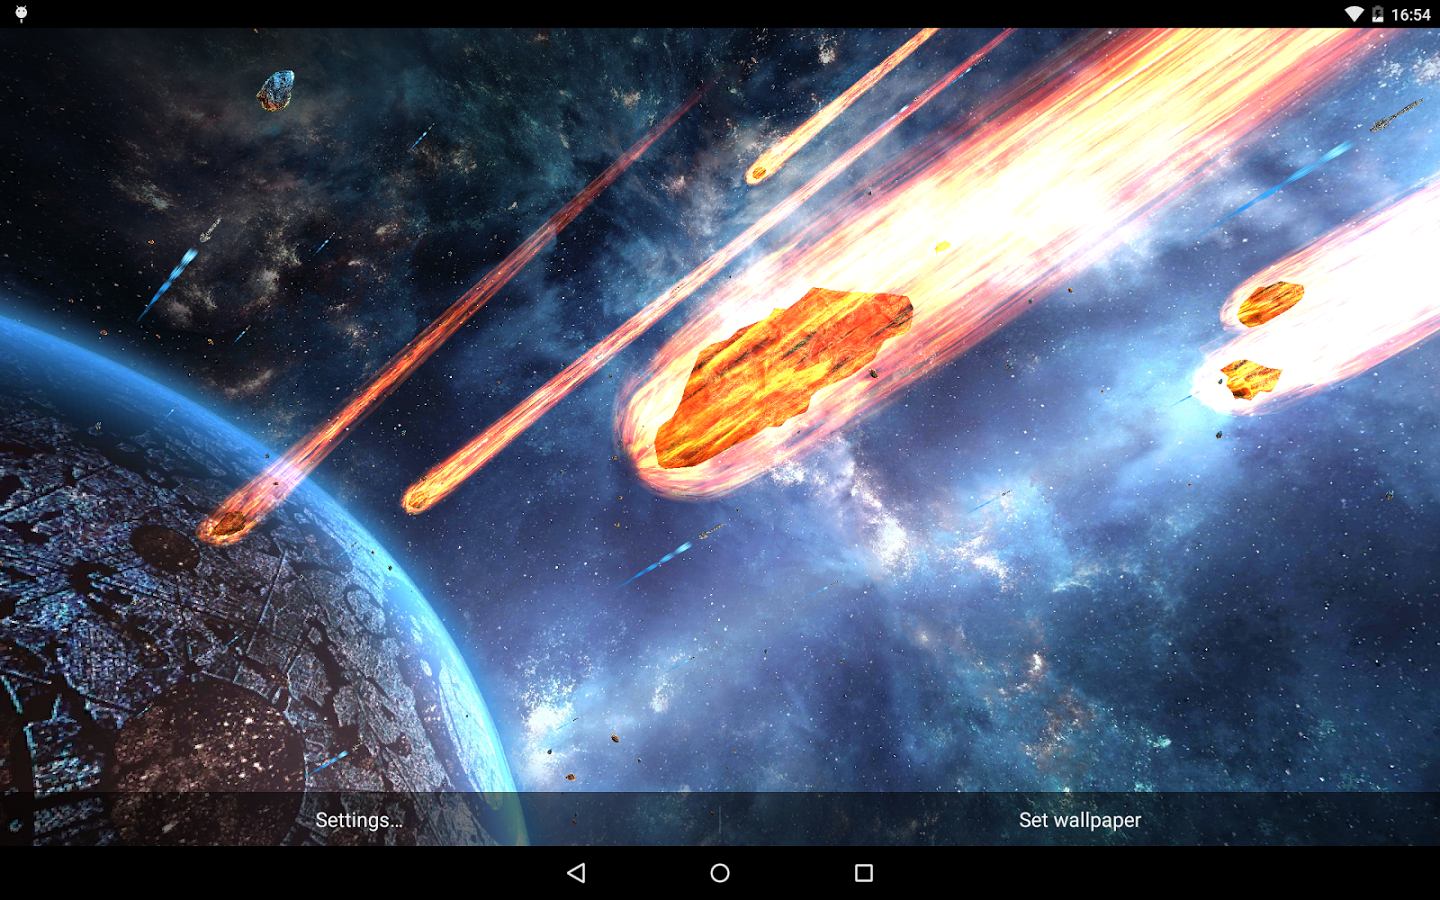 armageddon wallpaper,outer space,space,strategy video game,astronomical object,screenshot